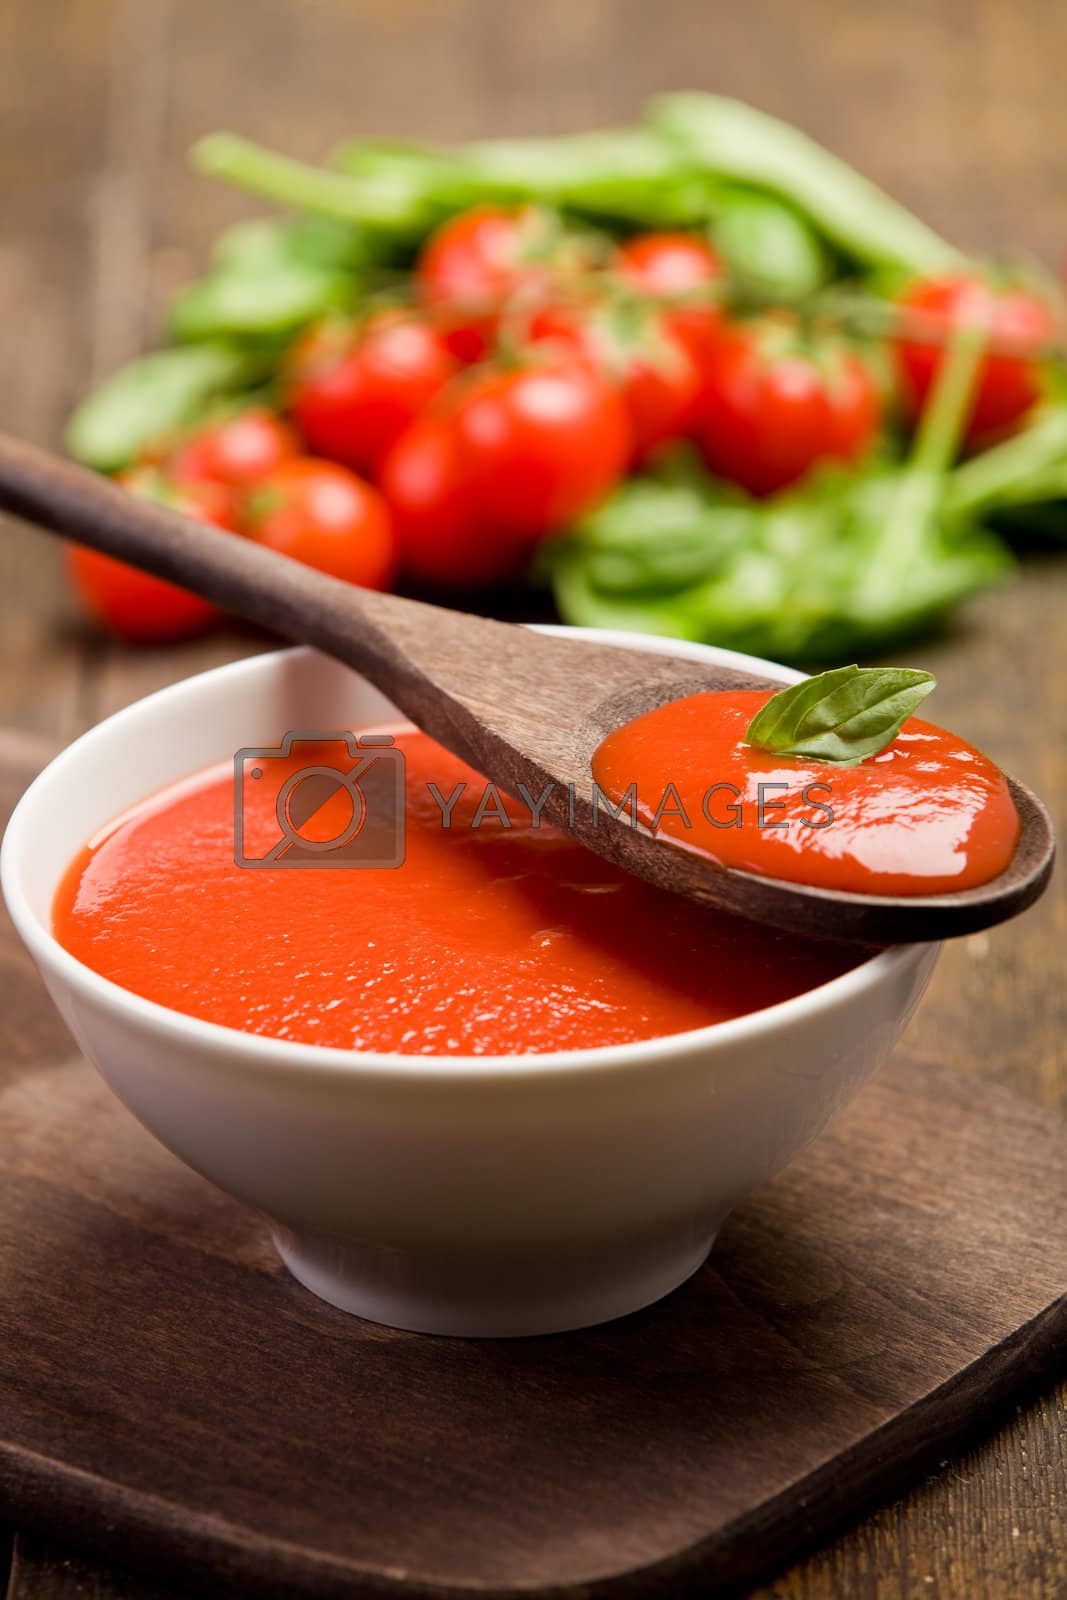 Royalty free image of Tomato sauce by genious2000de